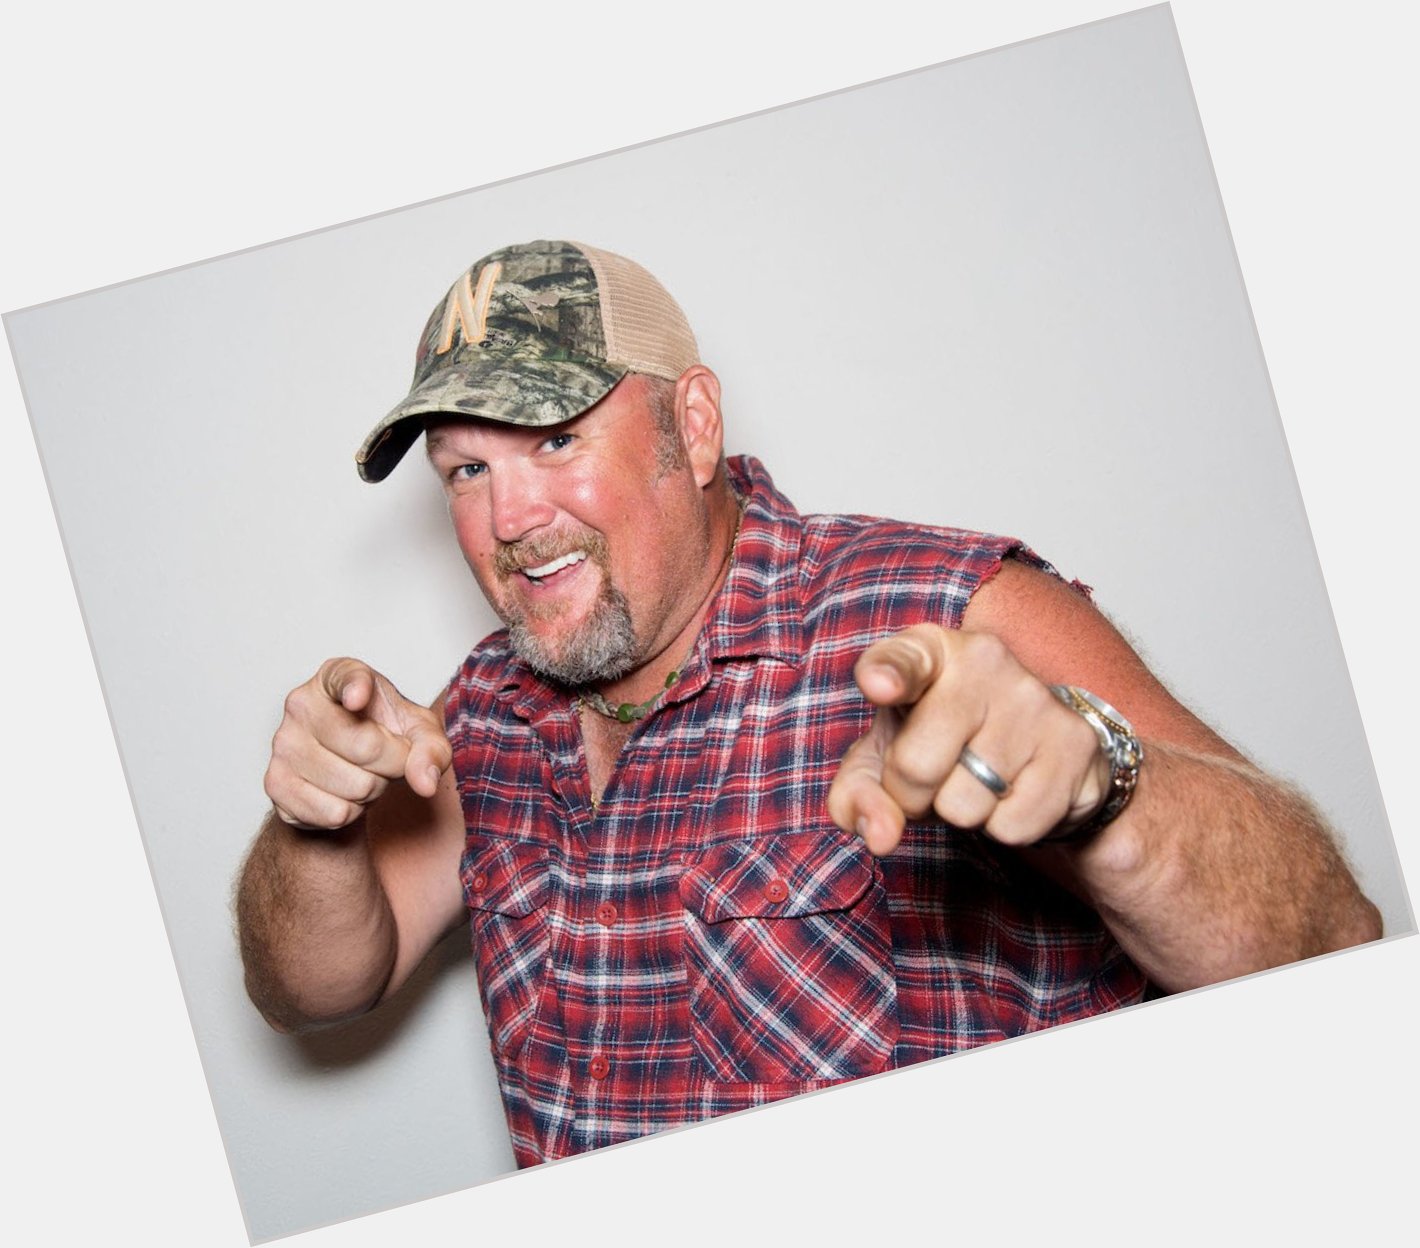 Happy birthday to funny guy Larry The Cable Guy! 